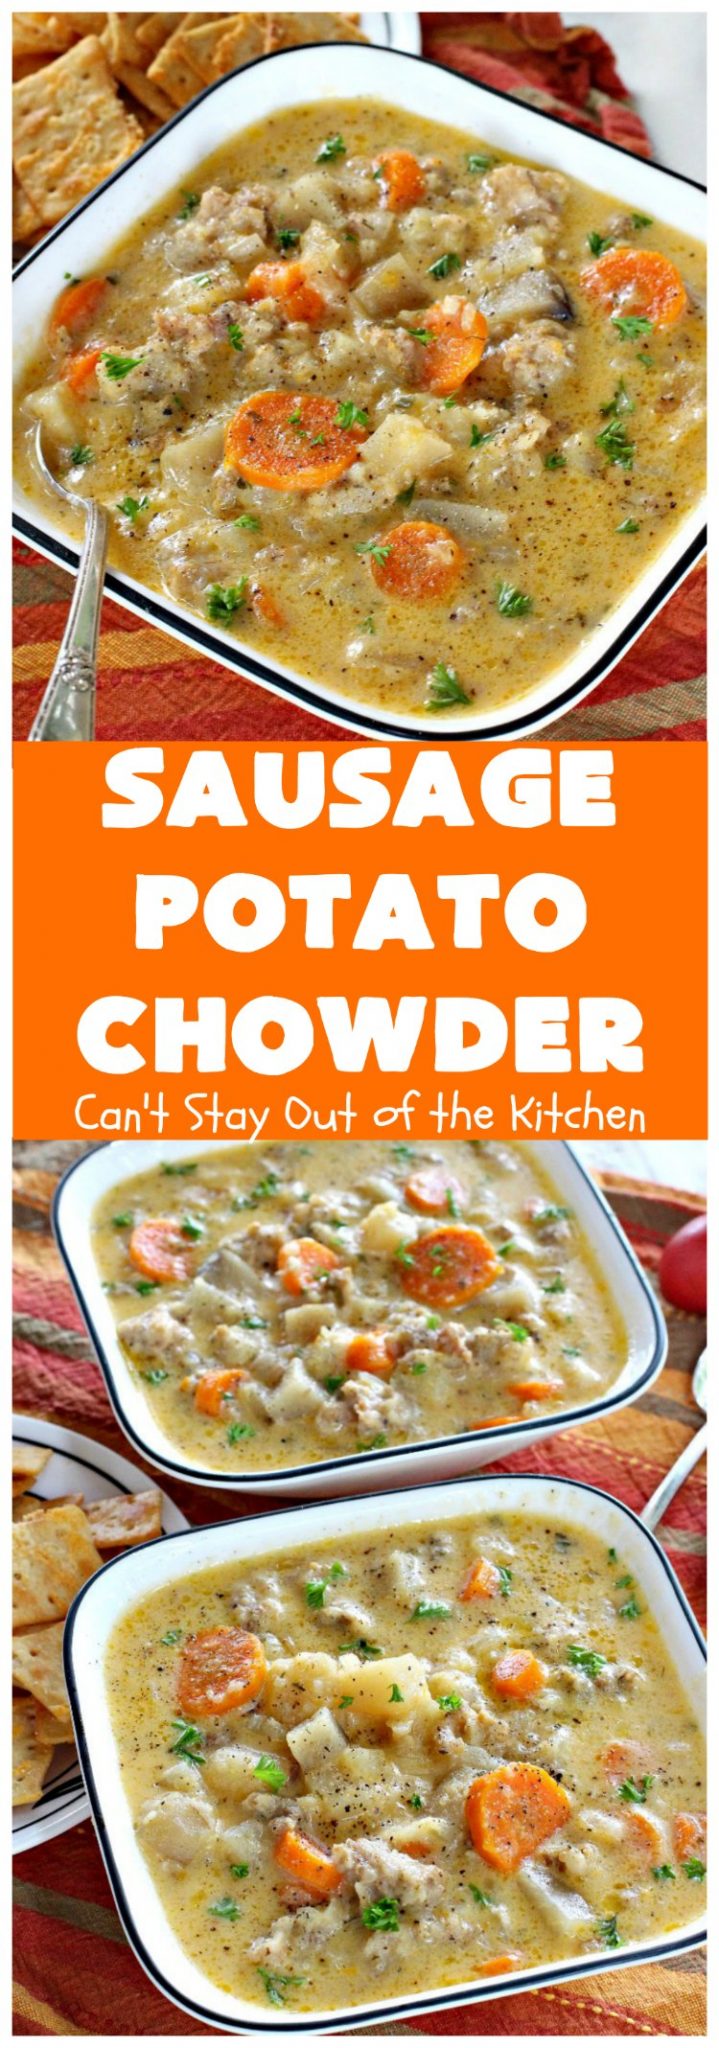 Sausage, Potato and Corn Chowder – Can't Stay Out of the Kitchen